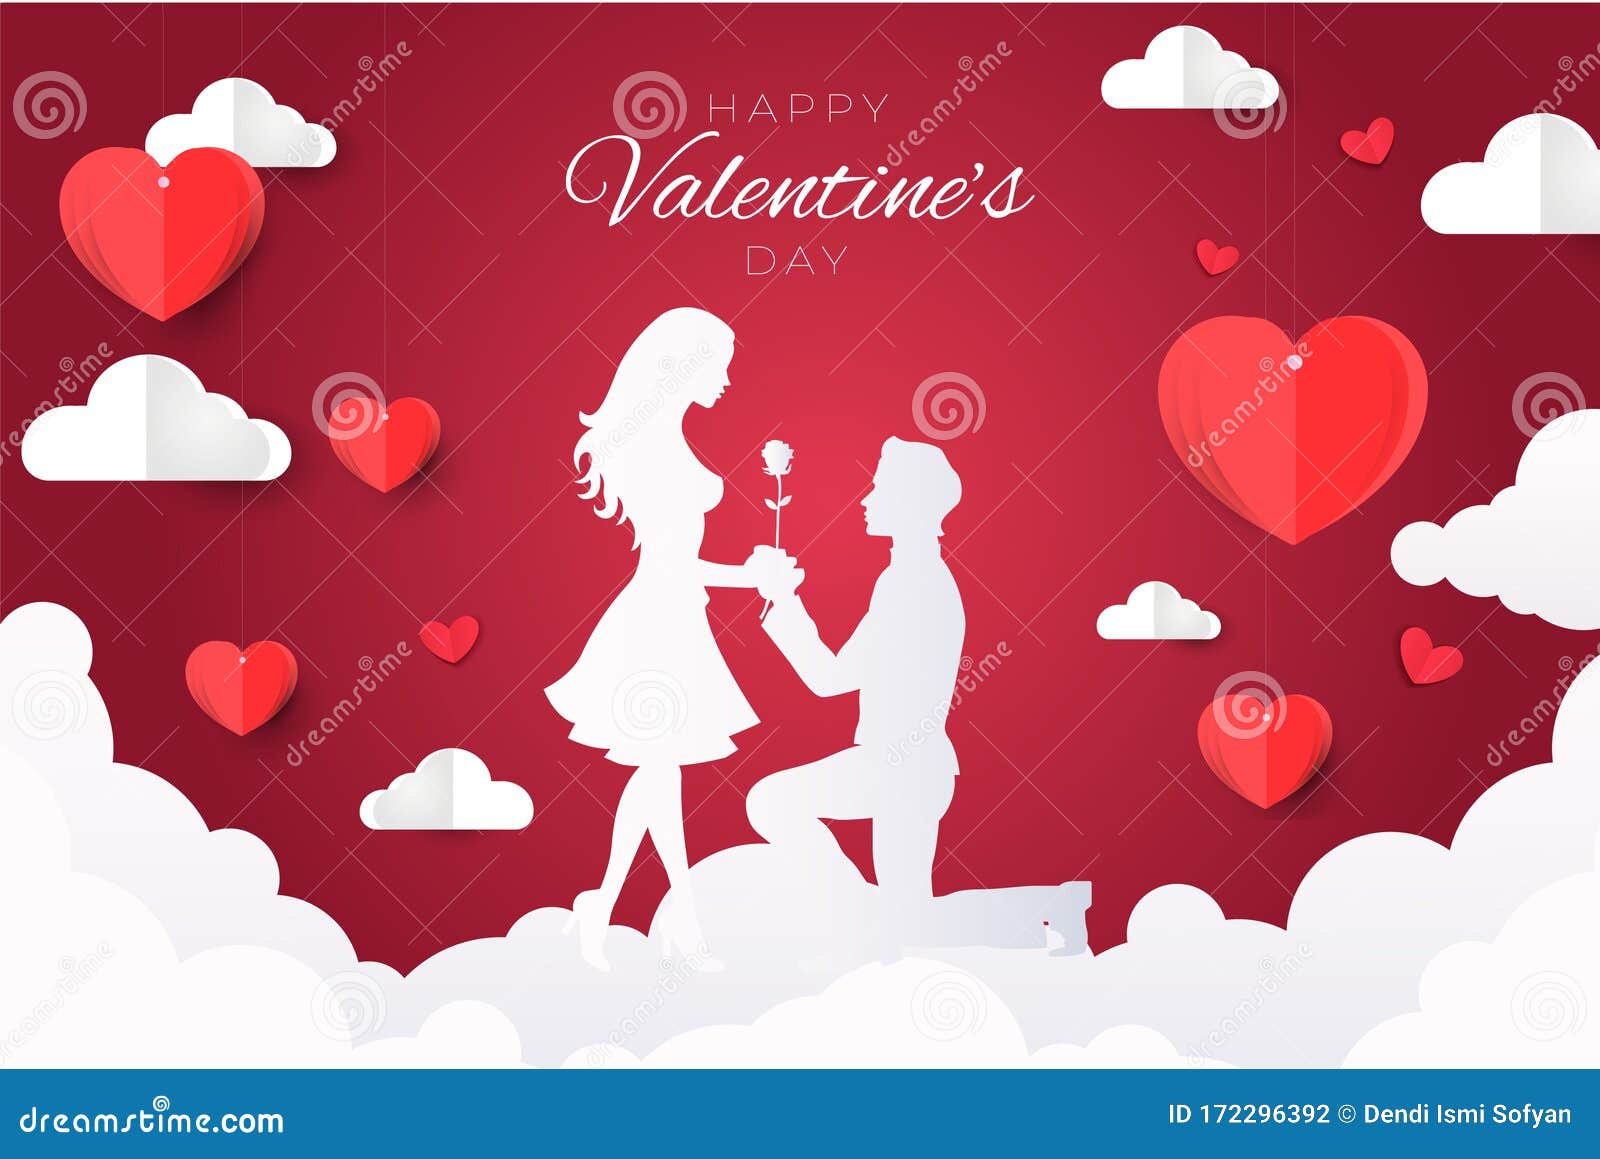 https://thumbs.dreamstime.com/z/dating-couple-silhouette-declaration-love-young-romantic-loving-male-female-character-mutual-sympathy-cartoon-flat-vector-172296392.jpg